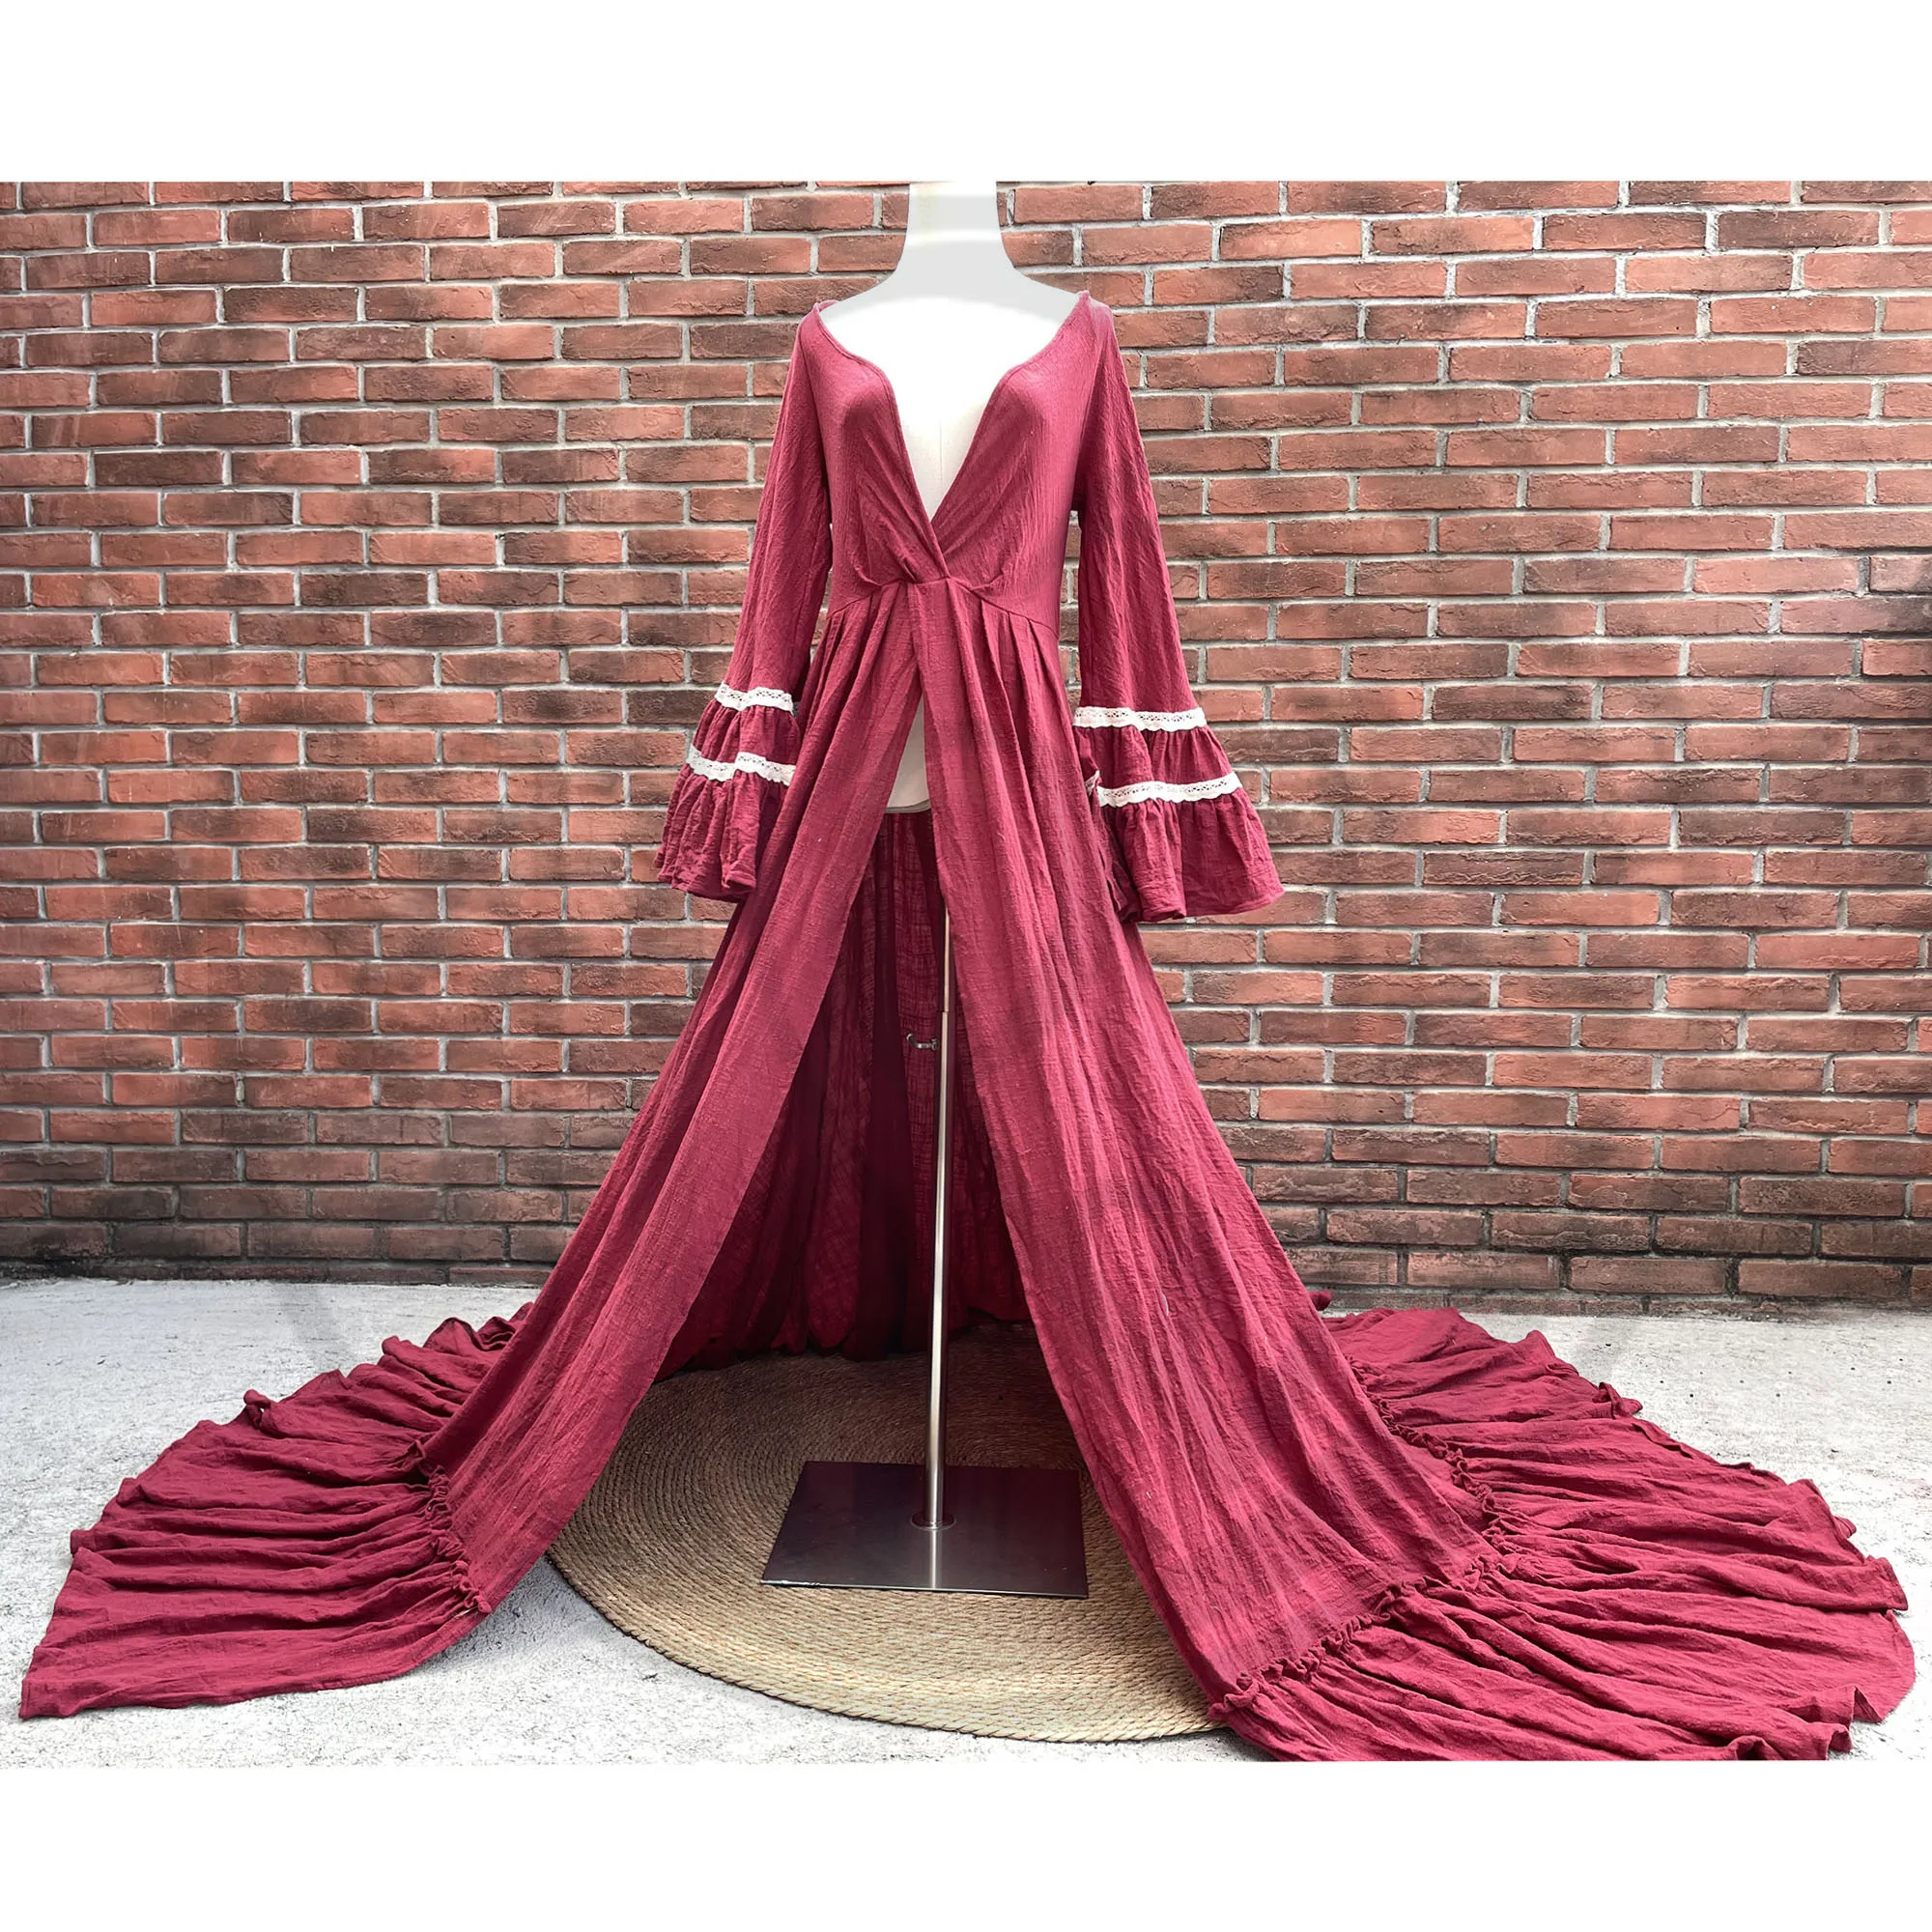 Soft Linen Photo Shoot Prop Maxi Long Cotton Deep V Robe Maternity Dress Evening Party Costume for Women Photography Accessories enlarge